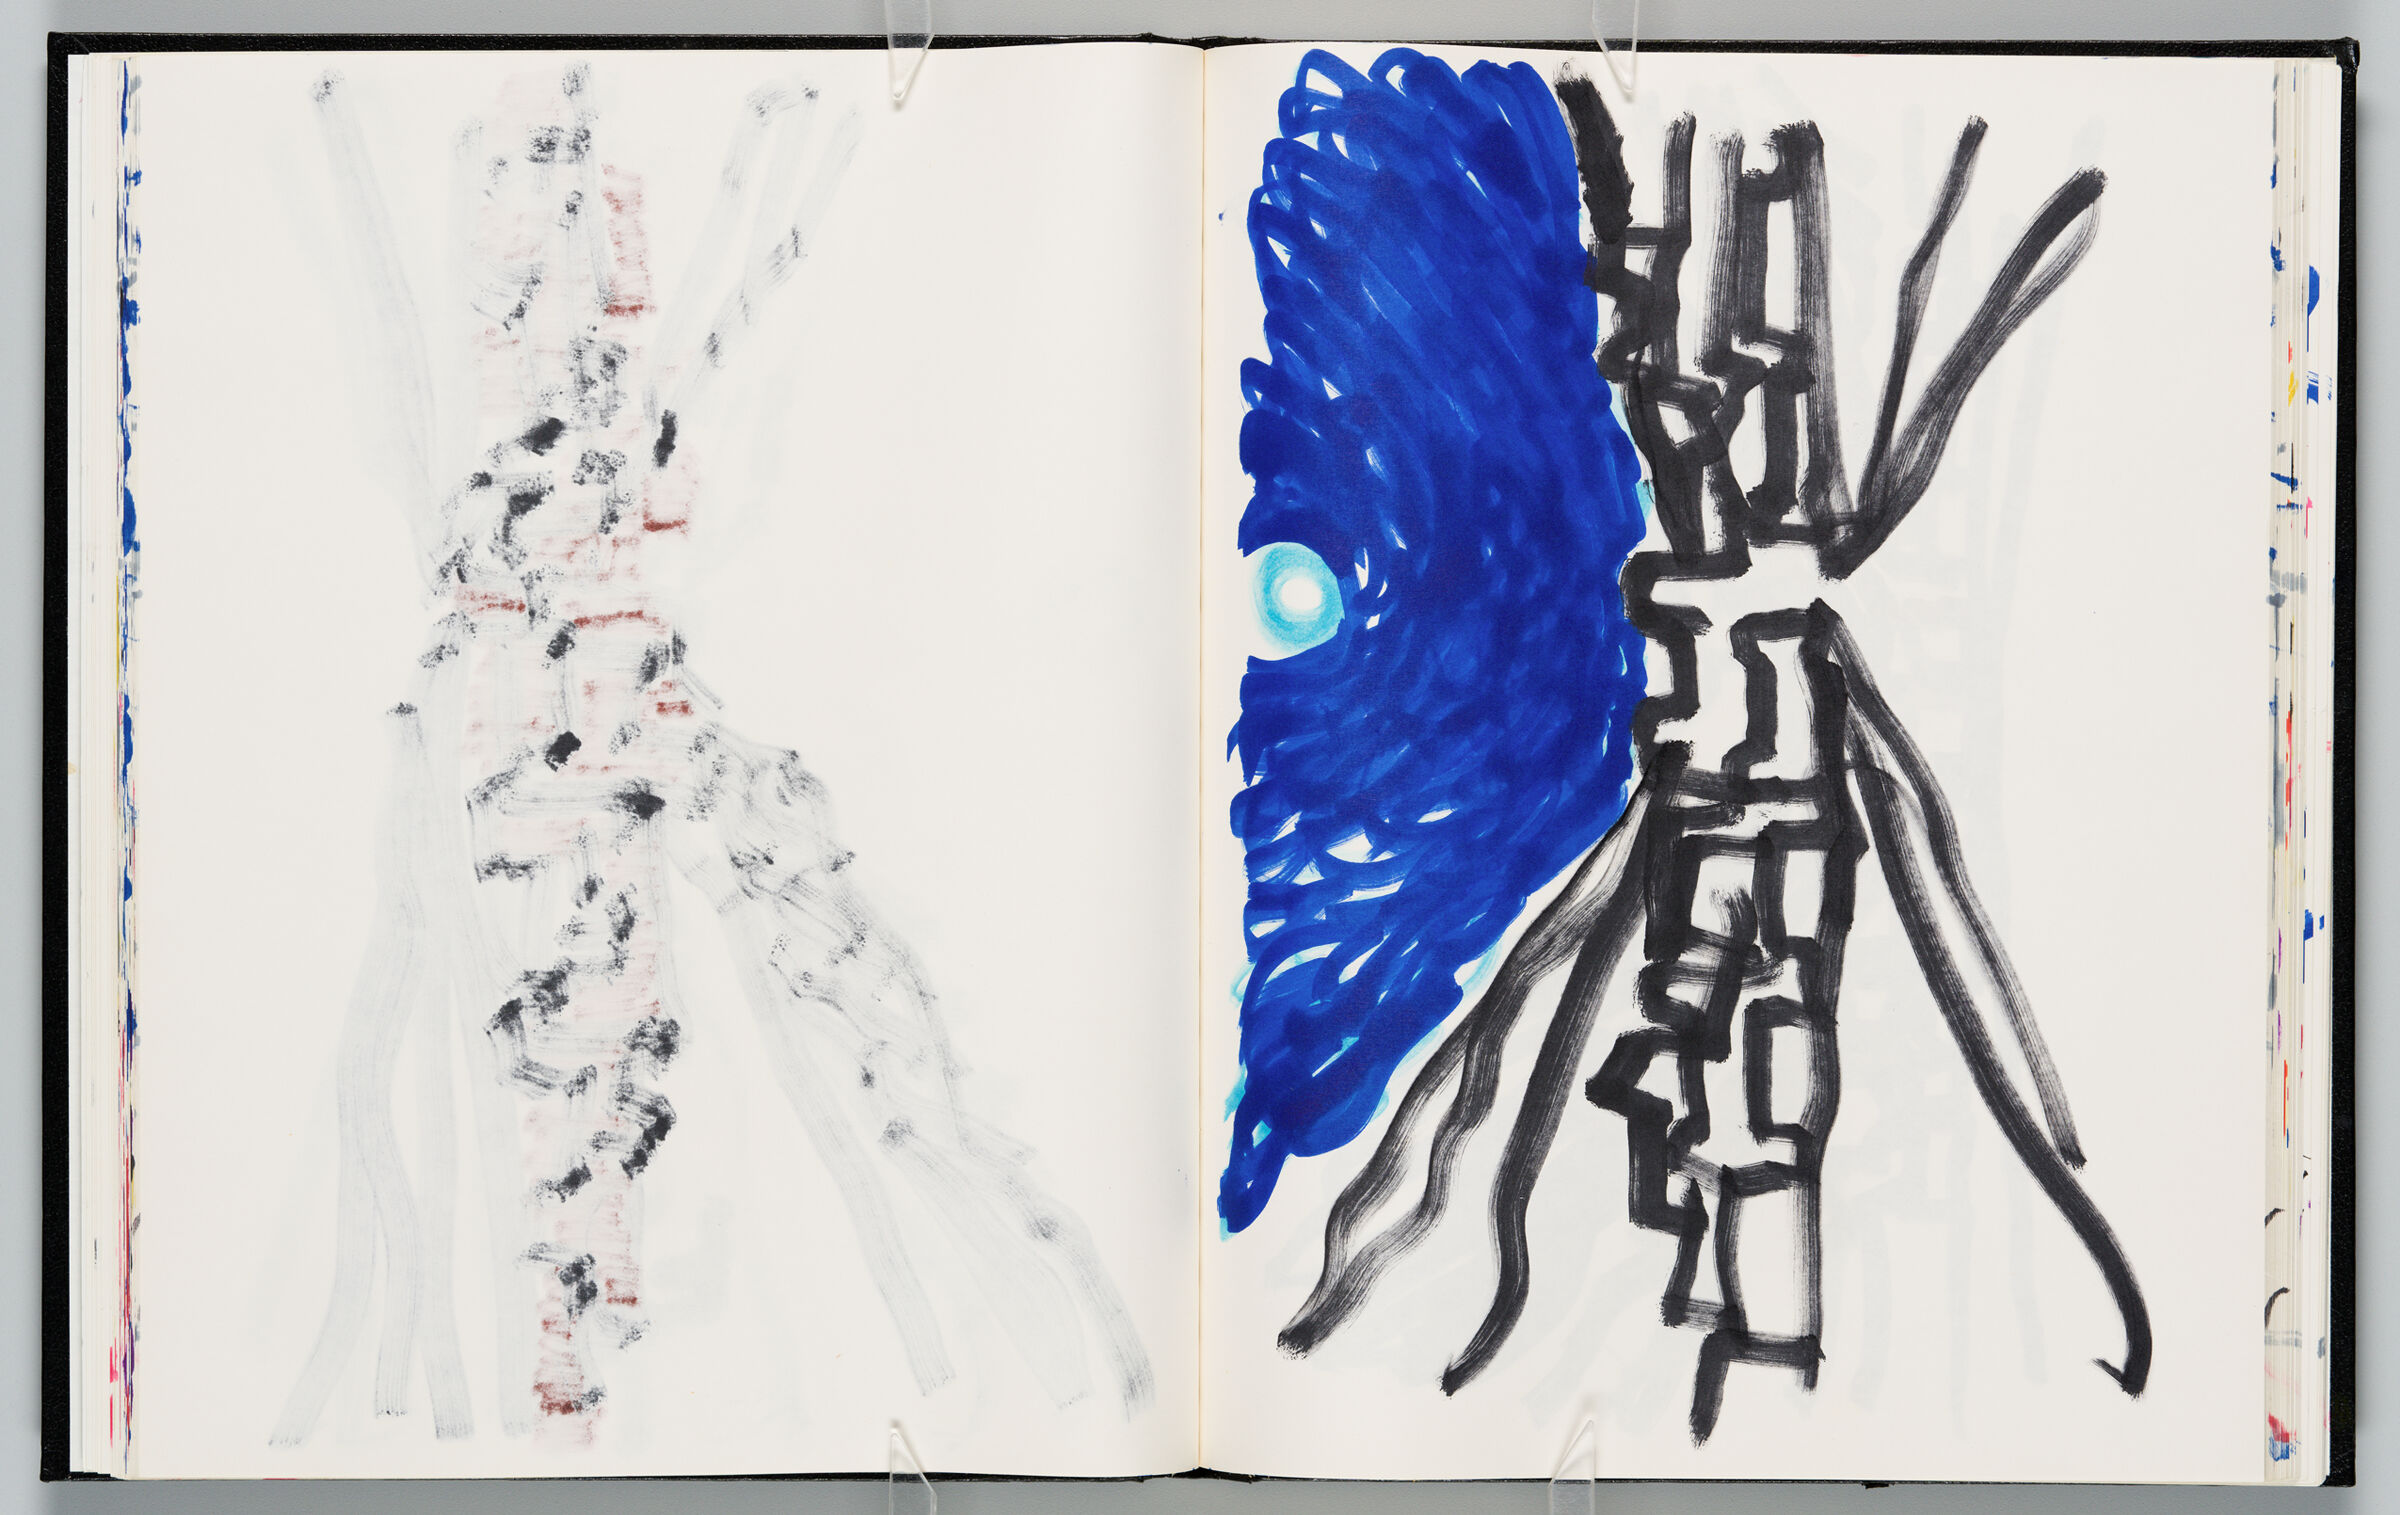 Untitled (Bleed-Through Of Previous Page, Left Page); Untitled (View Of Zagora, Right Page)